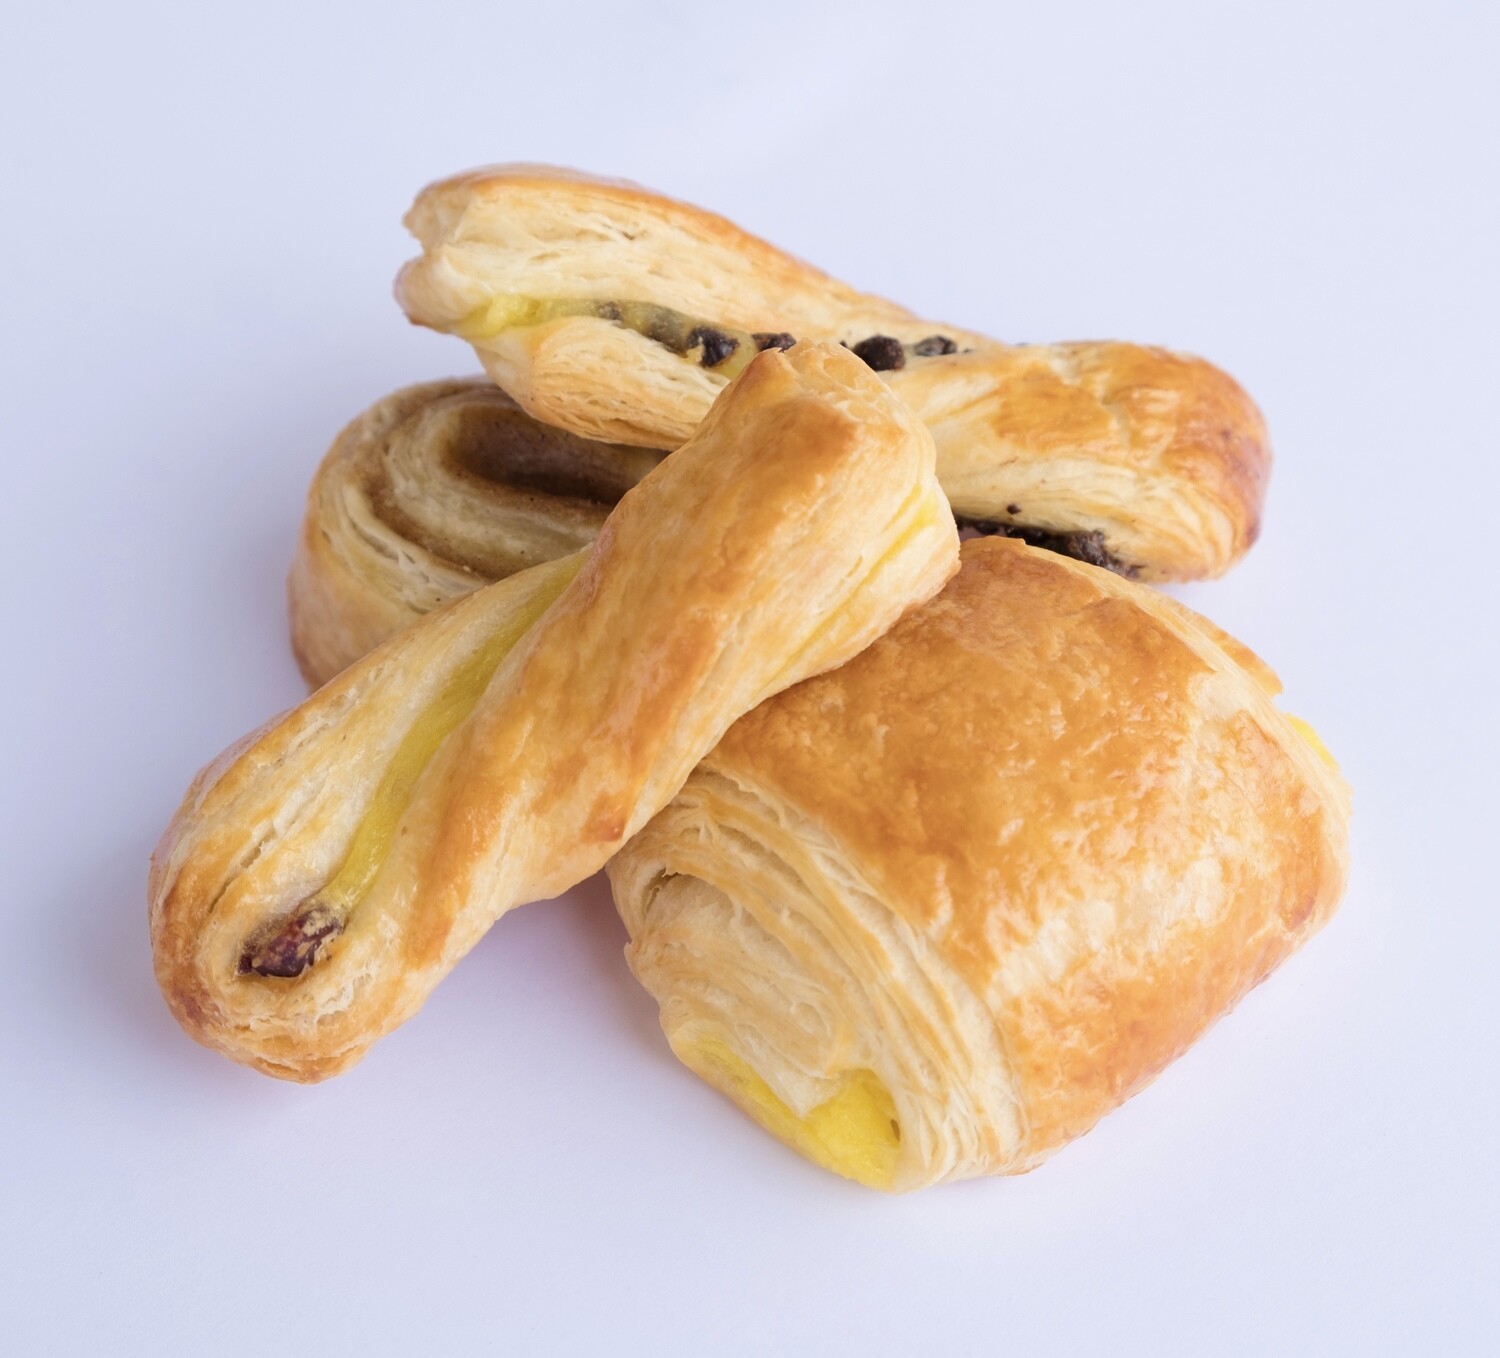 Danish pastry selection (20)